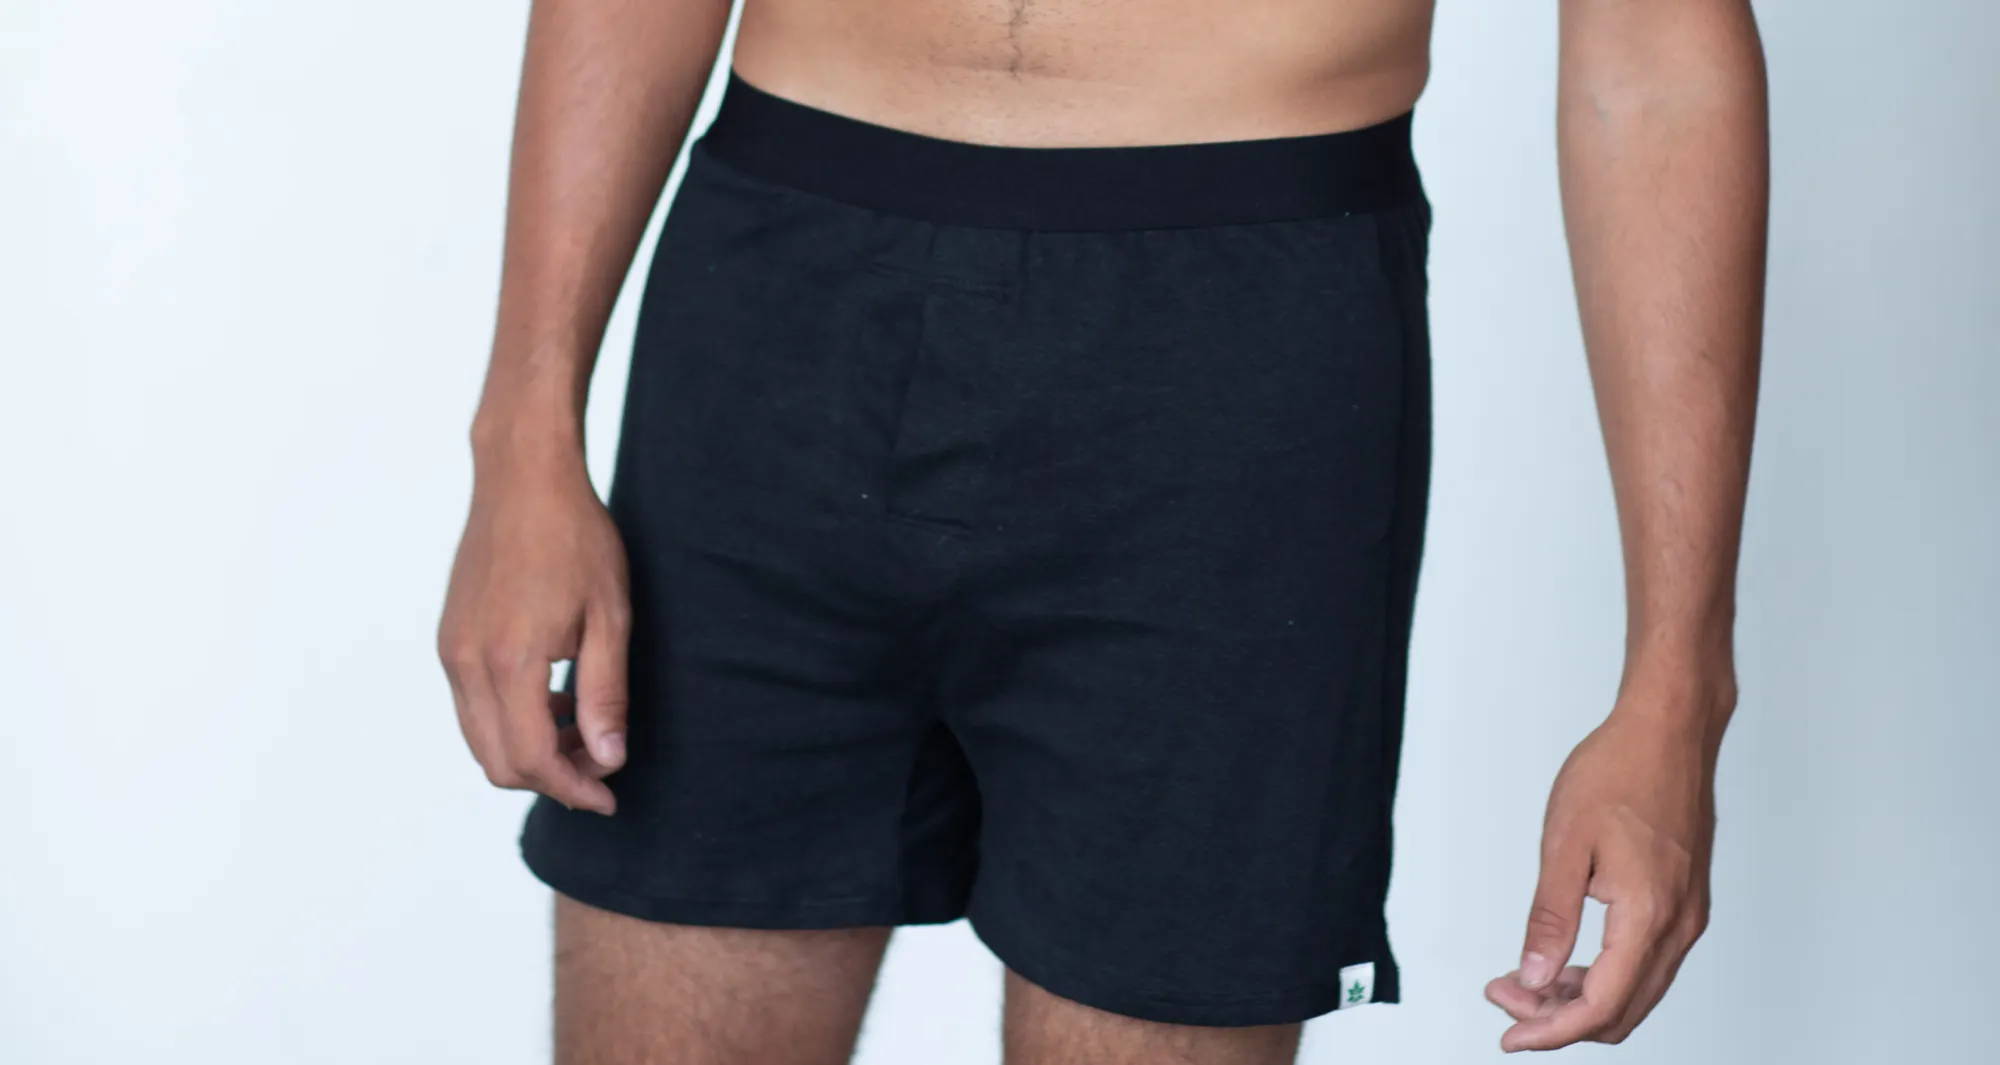 man wearing black boxers against a white background 